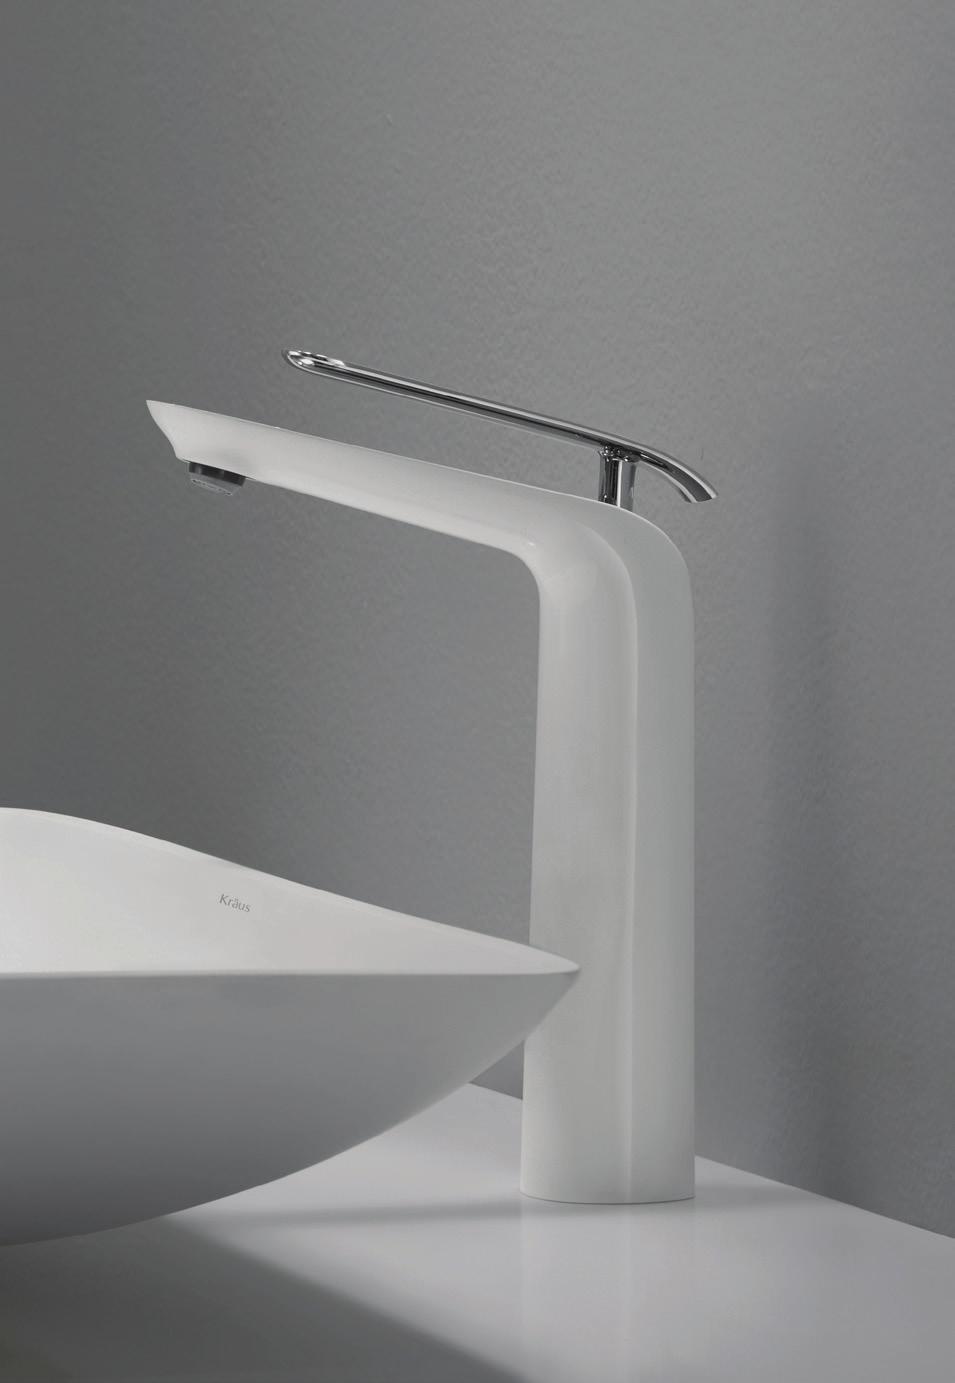 02 KRAUS INTRODUCES NEW BATHROOM FAUCET FAMILY Outfit your bathroom in style 5/2015 Port Washington, NY Kraus is introducing a bold new way to give your bathroom a modern makeover.